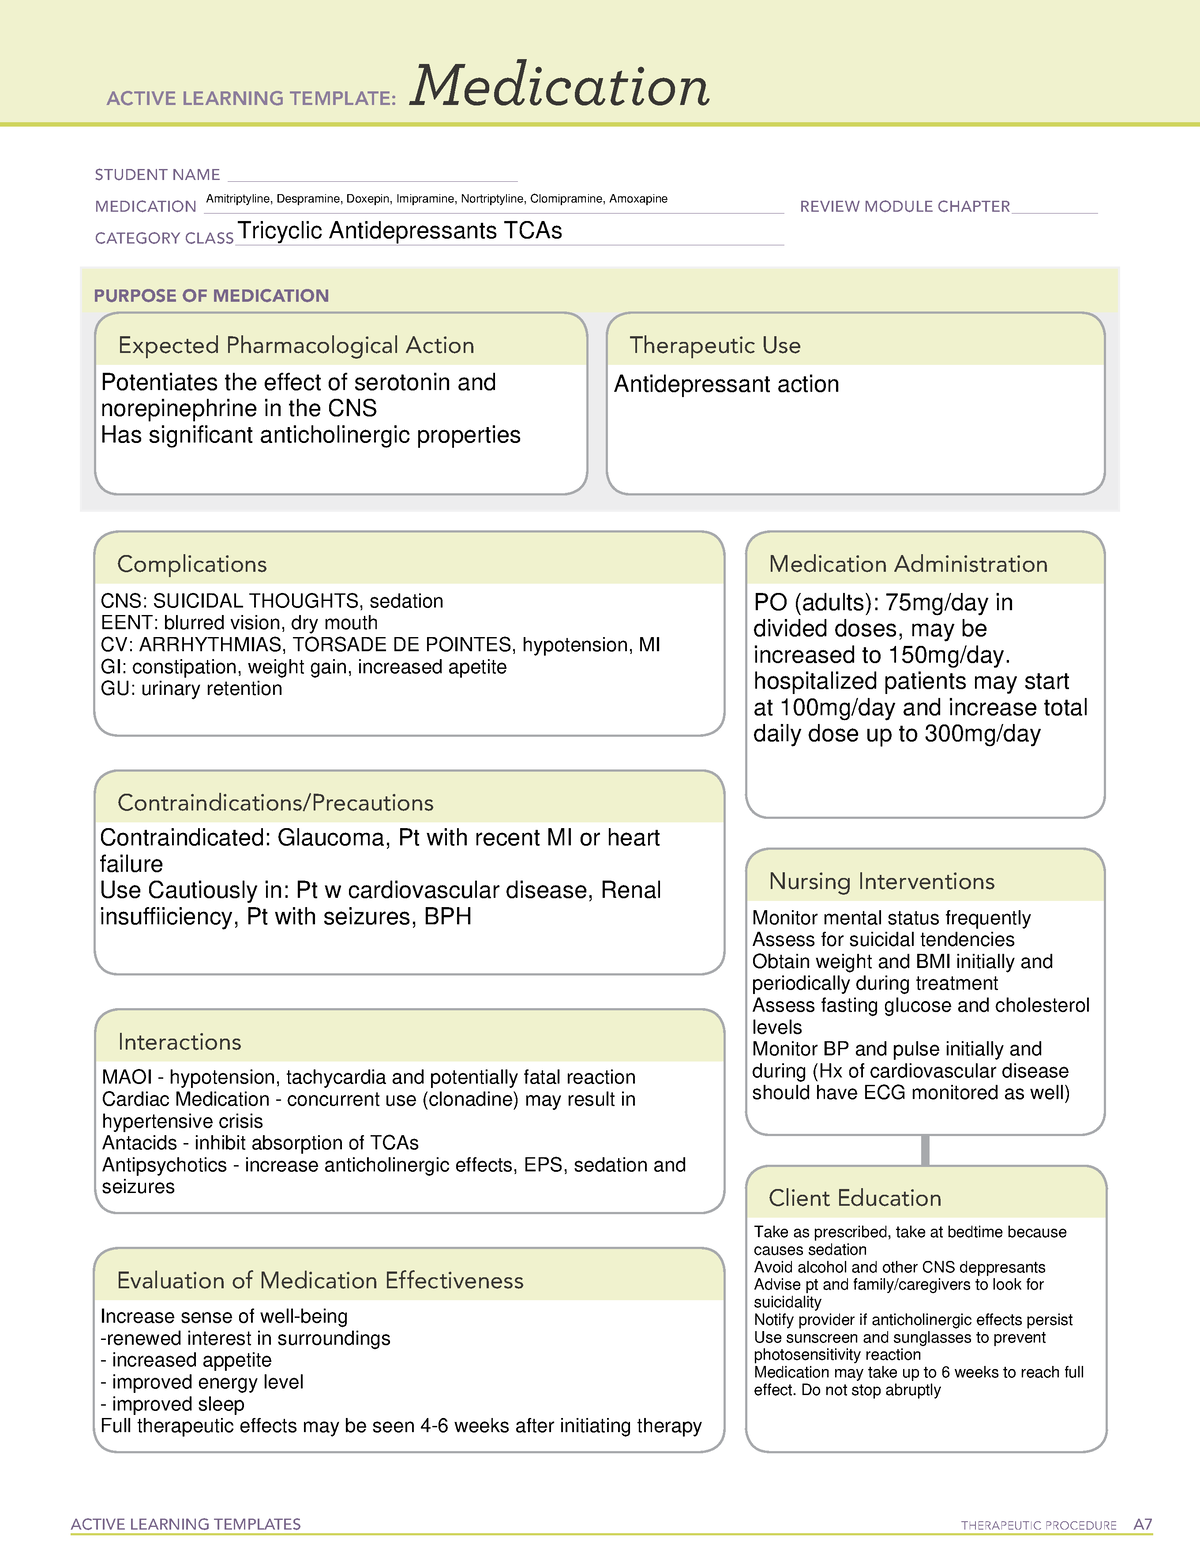 TCAs Medication ATI Template Mental Health ACTIVE LEARNING TEMPLATES